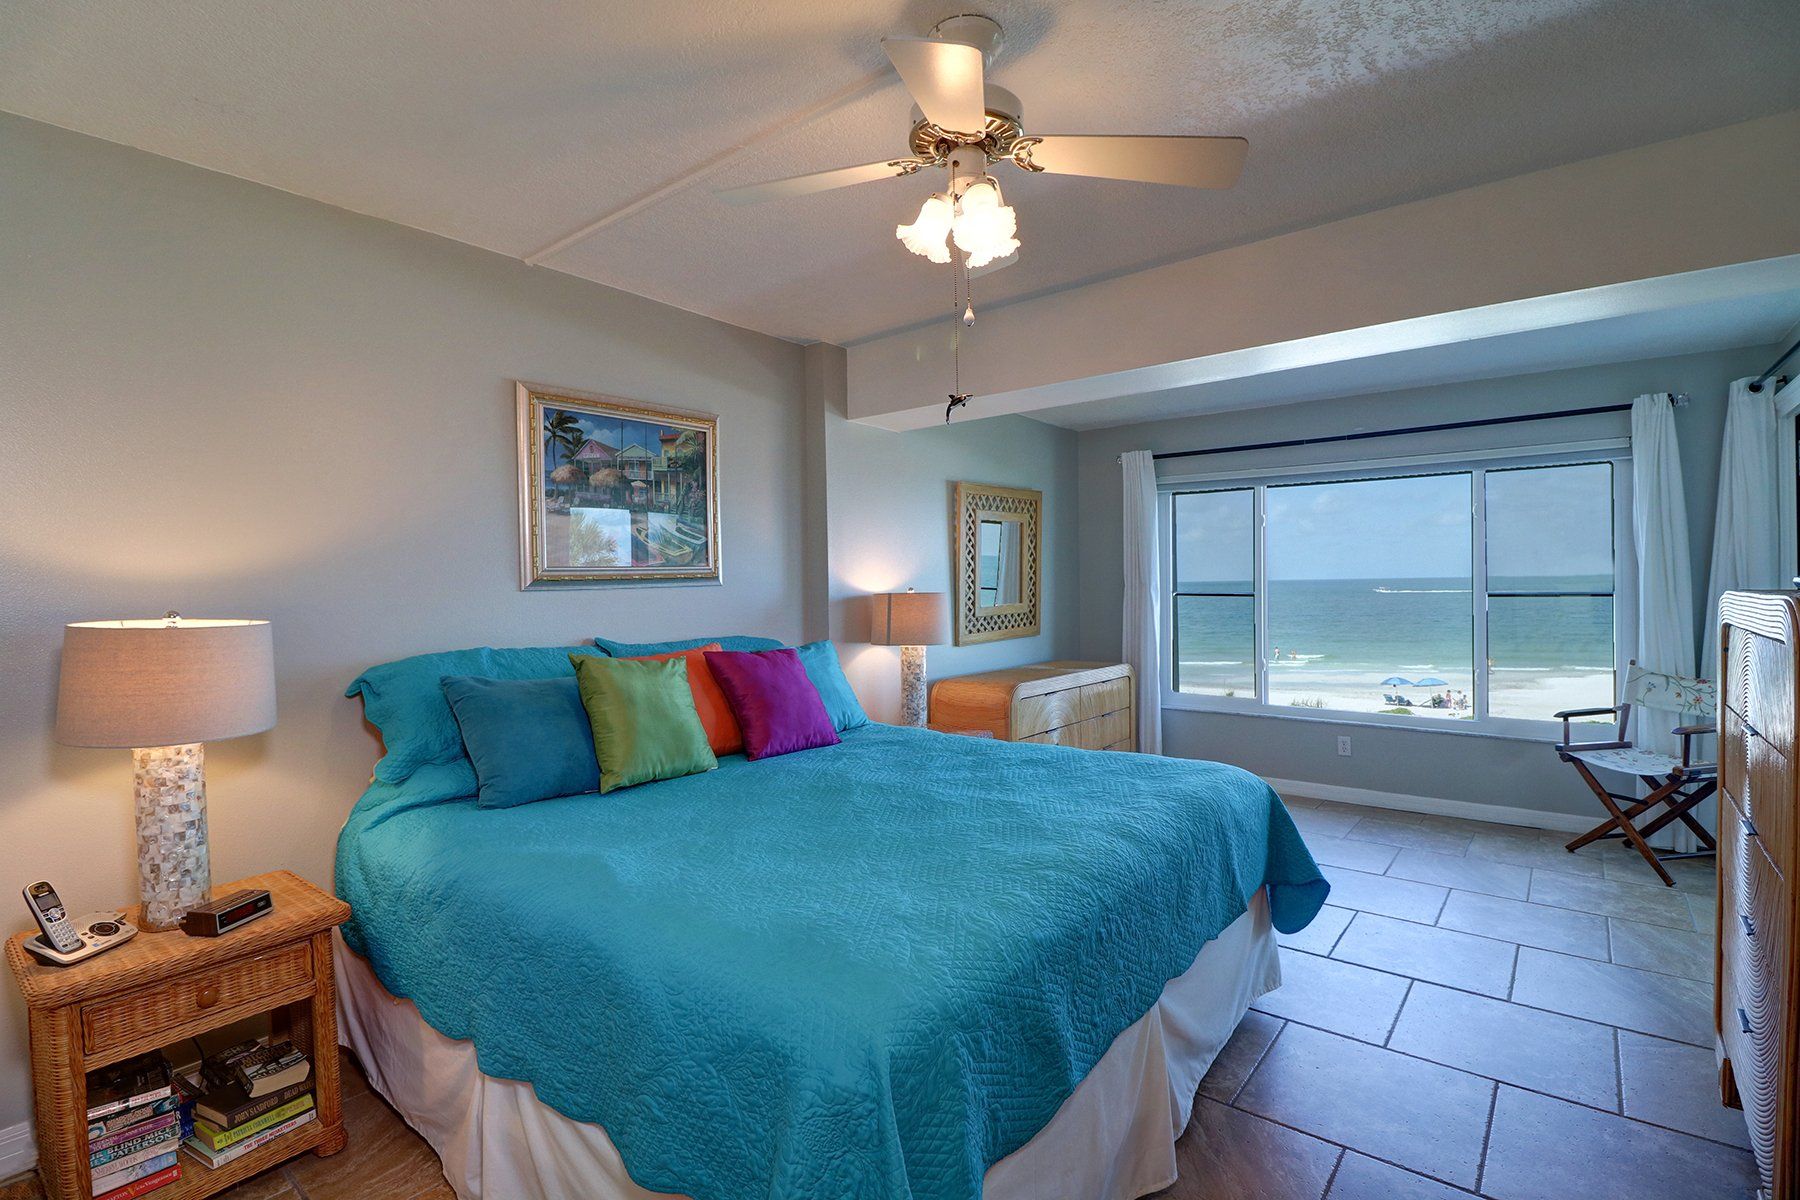 King bed with blue cover, multicolor pillows, bureau, mirror, lamp, chair and view of Gulf of Mexico